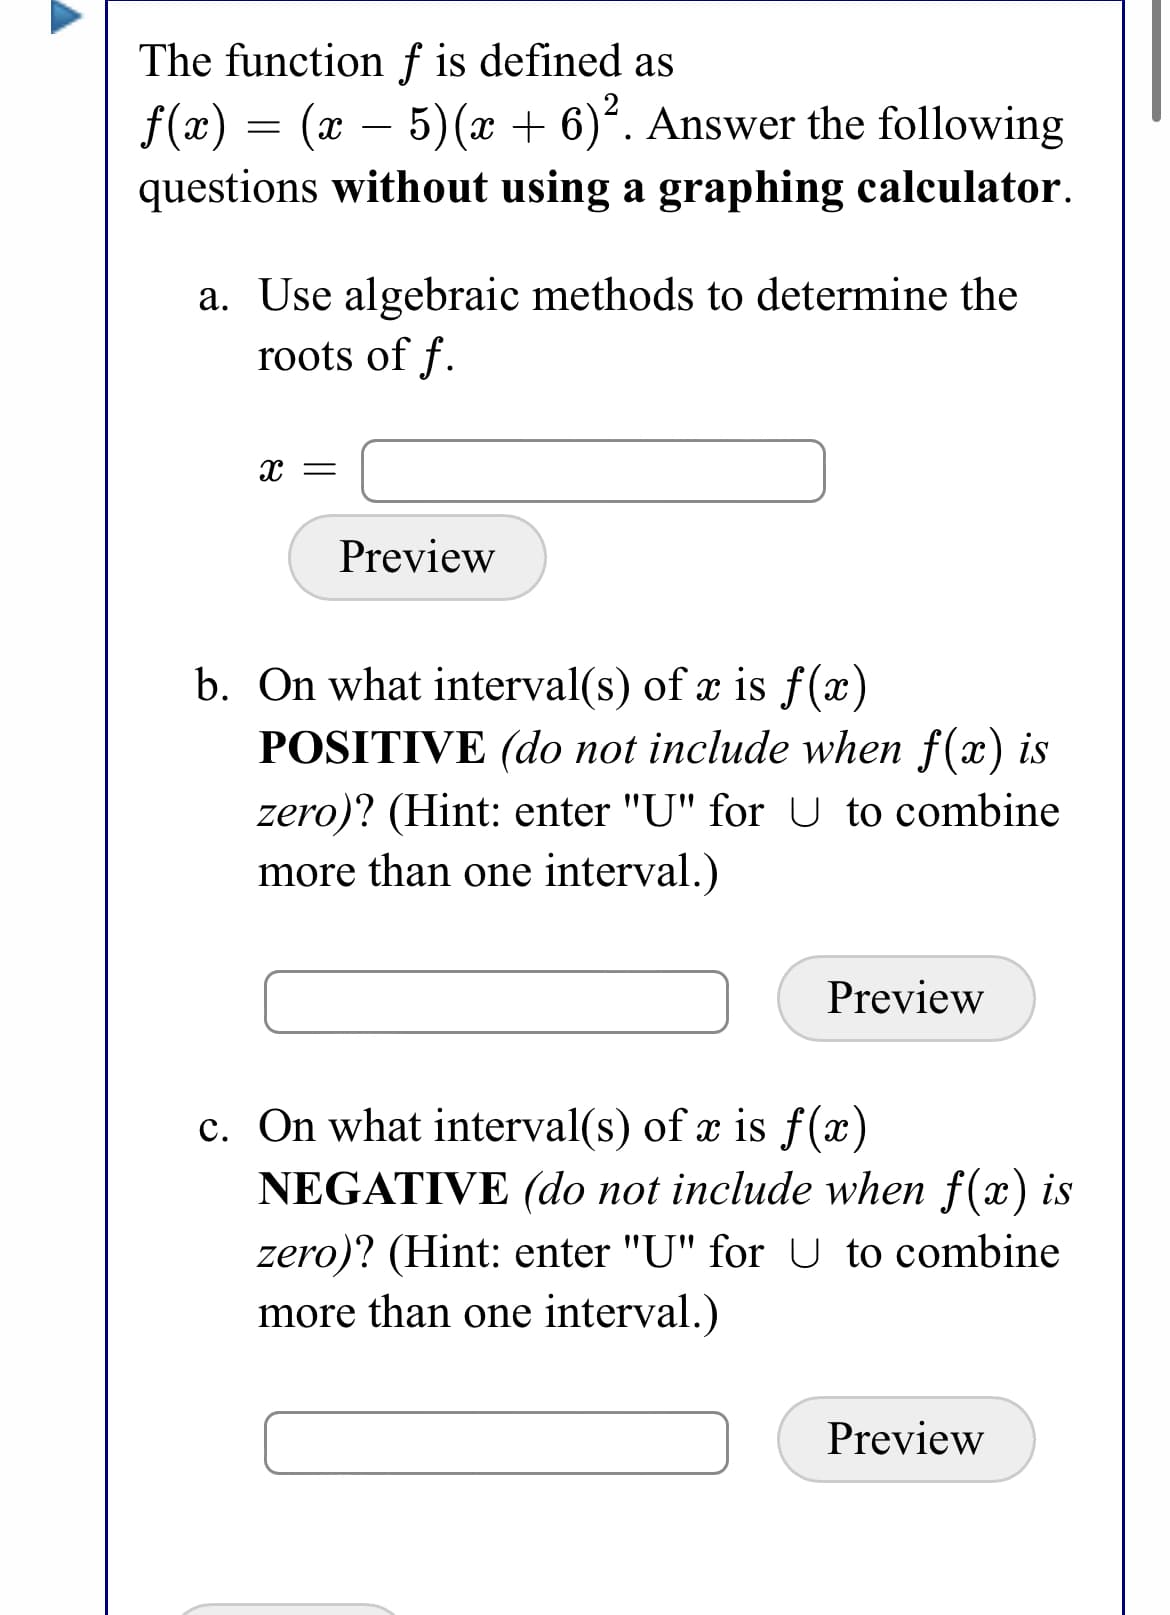 The function f is defined as
5) (x + 6). Answer the following
f(x) = (x –
questions without using a graphing calculator.
-
a. Use algebraic methods to determine the
roots of f.
X =
Preview
b. On what interval(s) of x is f(x)
POSITIVE (do not include when f(x) is
zero)? (Hint: enter "U" for U to combine
more than one interval.)
Preview
c. On what interval(s) of x is f(x)
NEGATIVE (do not include when f(x) is
zero)? (Hint: enter "U" for U to combine
more than one interval.)
Preview
